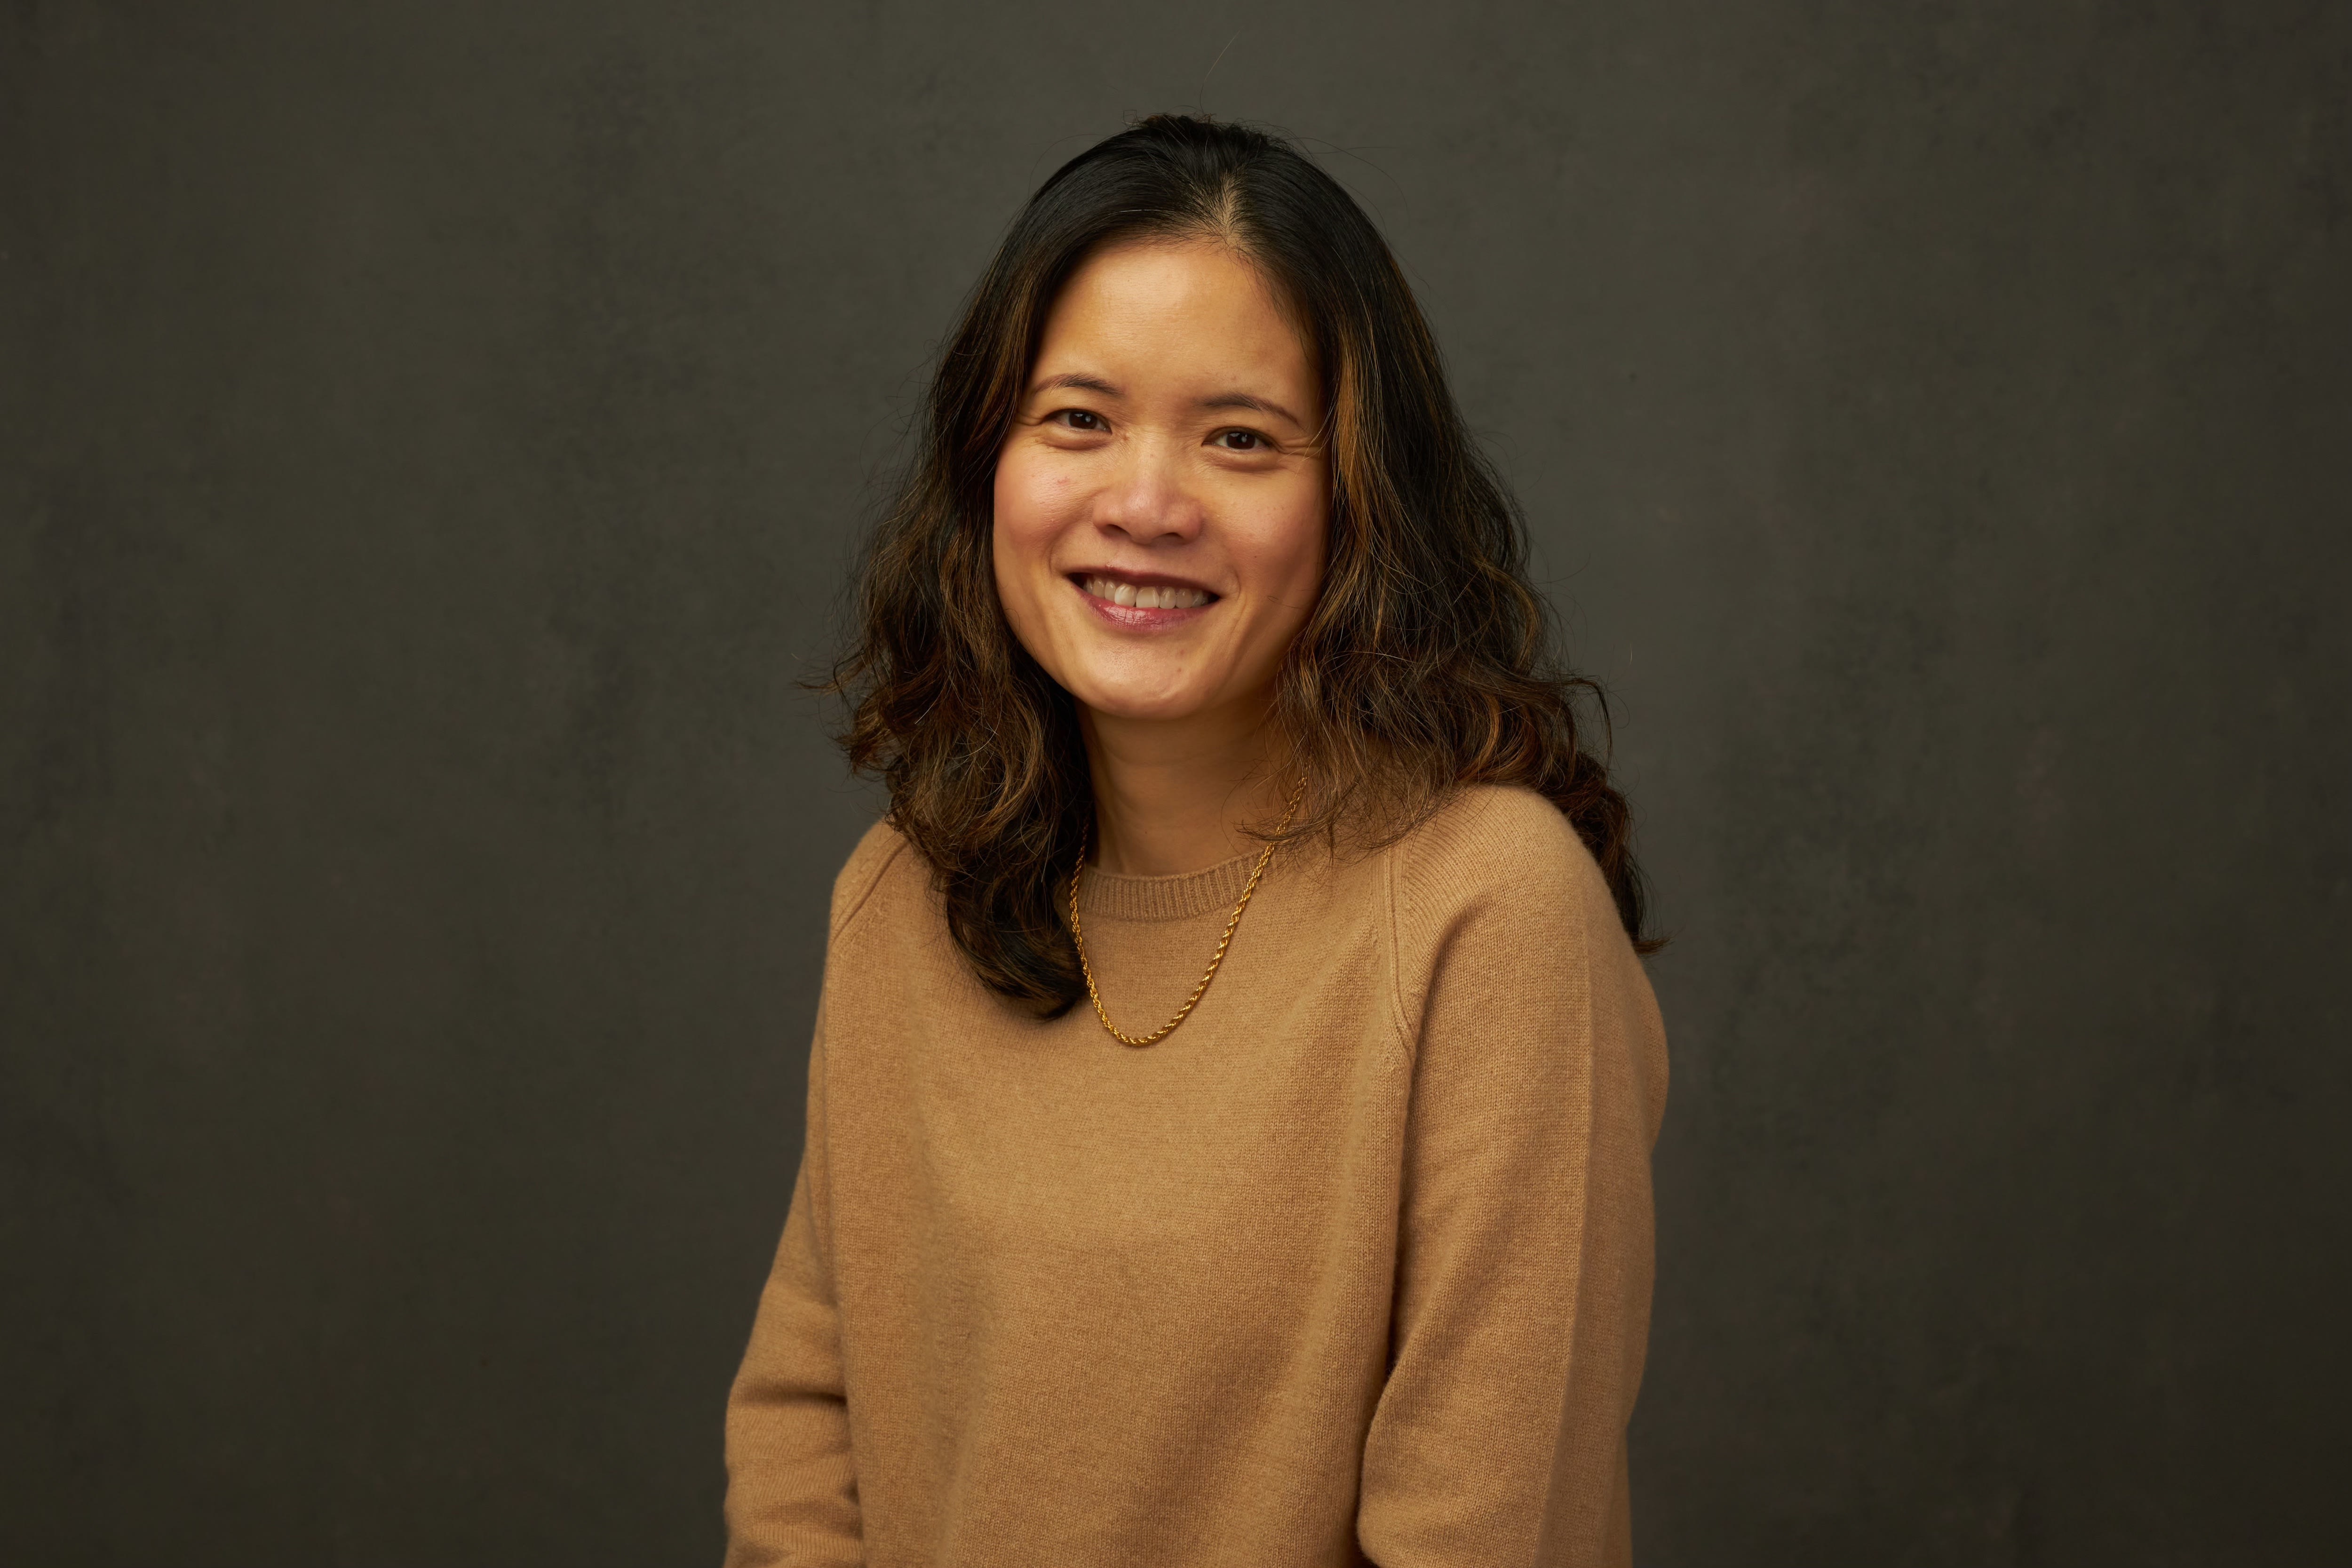 An Asian woman wearing a gold-coloured sweater poses for a portrait against a brown background